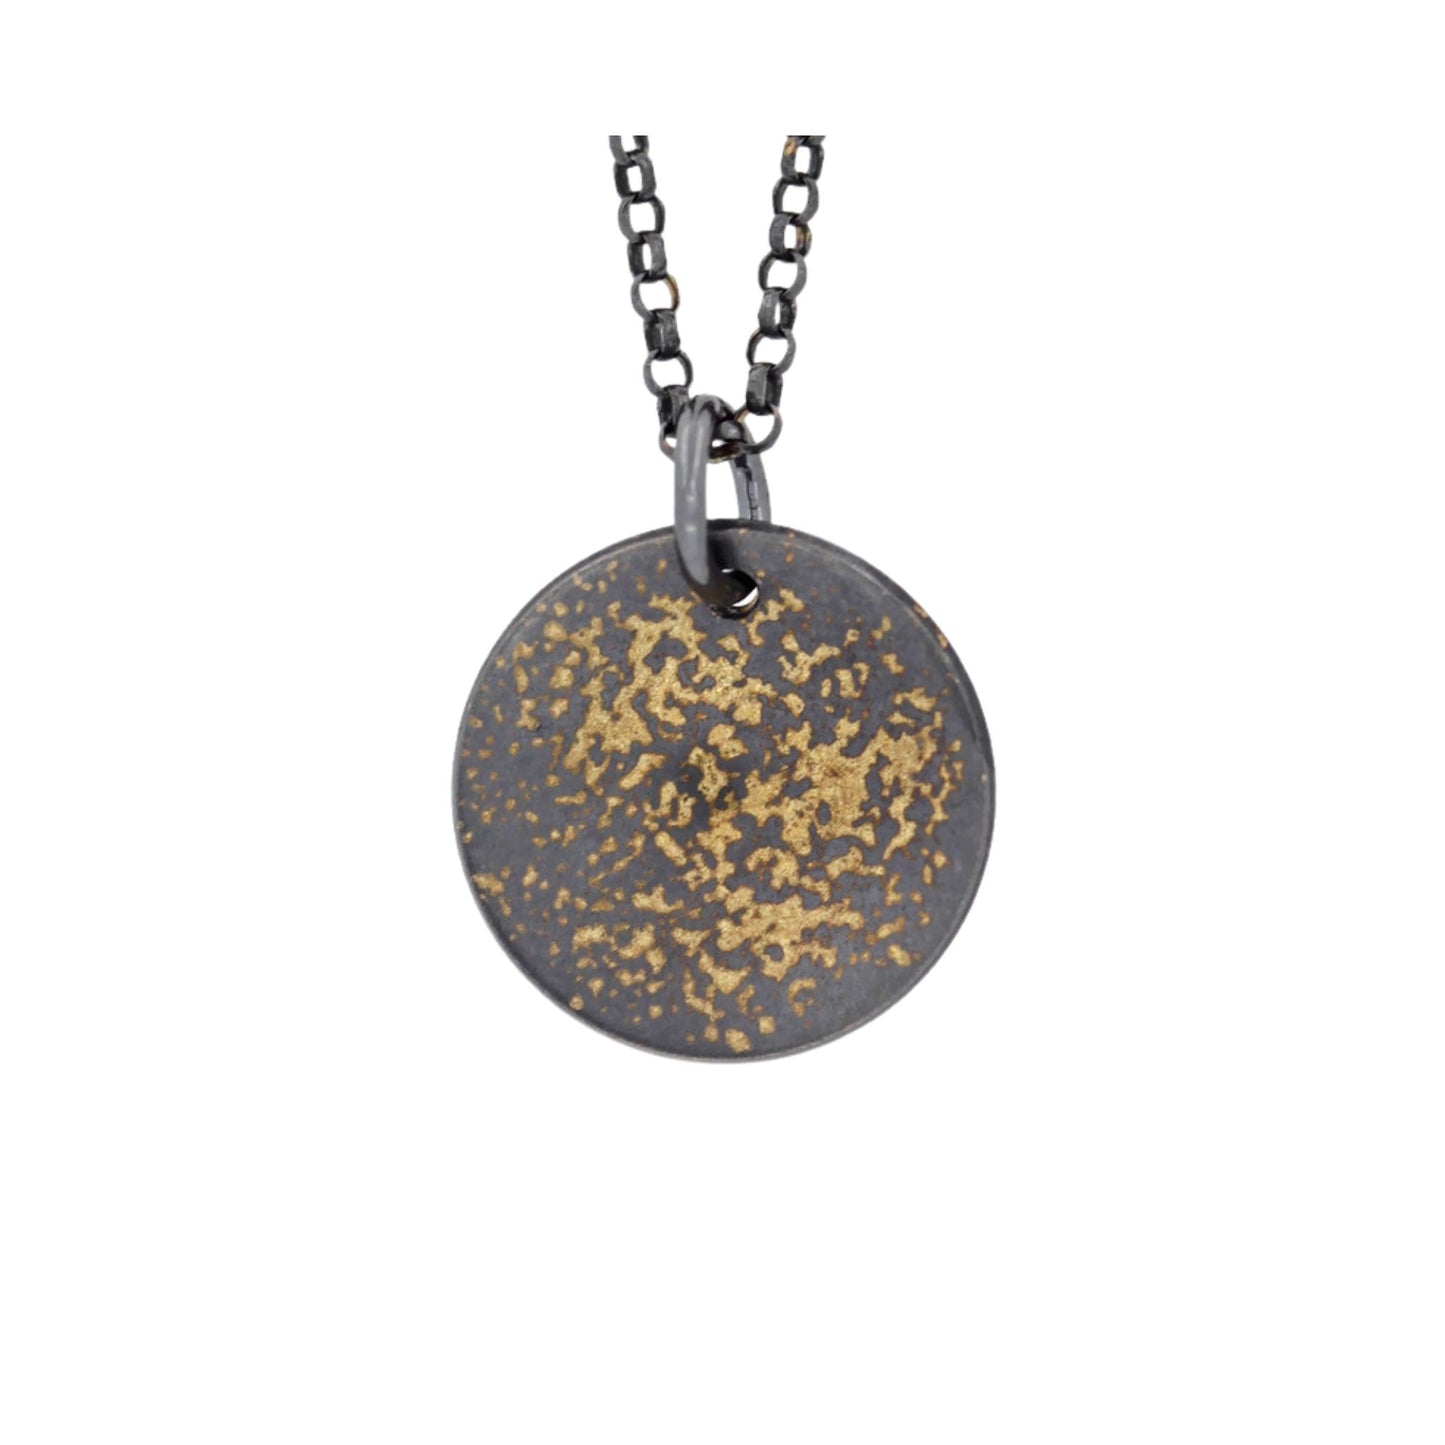 Galaxy coin necklace by Jen Lesea Designs